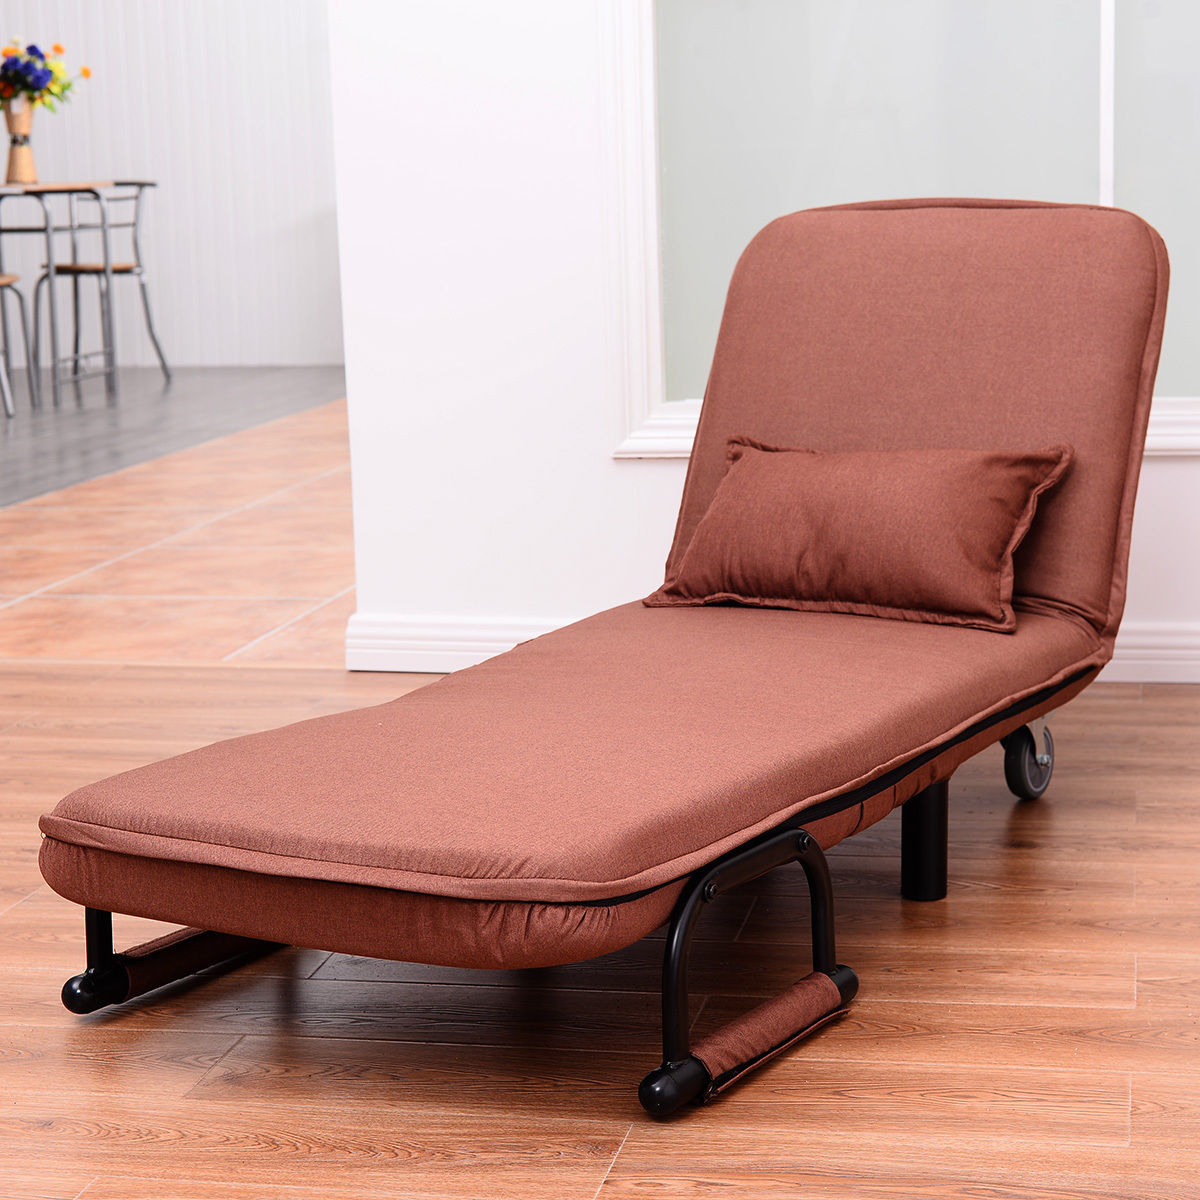 Costway Convertible Sofa Bed Folding, Convertible Sofa Bed Folding Arm Chair Sleeper Leisure Recliner Lounge Couch